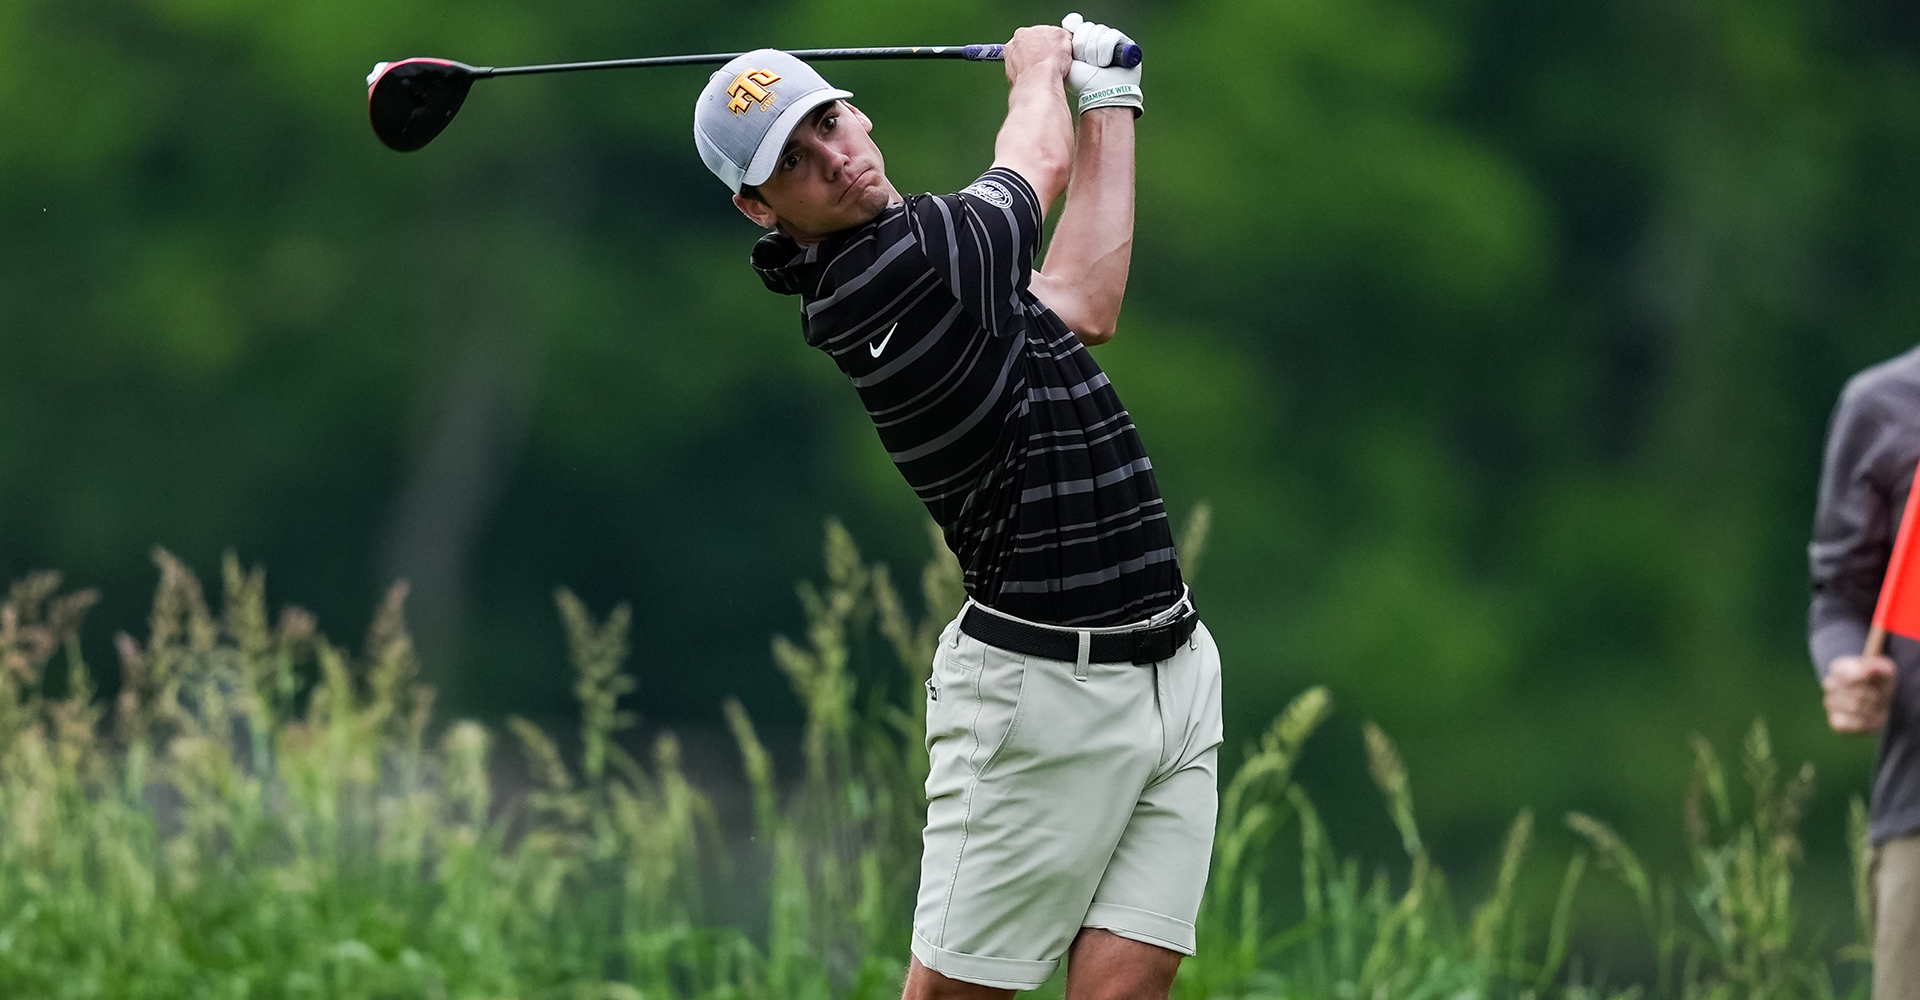 Second round of NCAA Regional shows marked improvement by Tech men's golf team